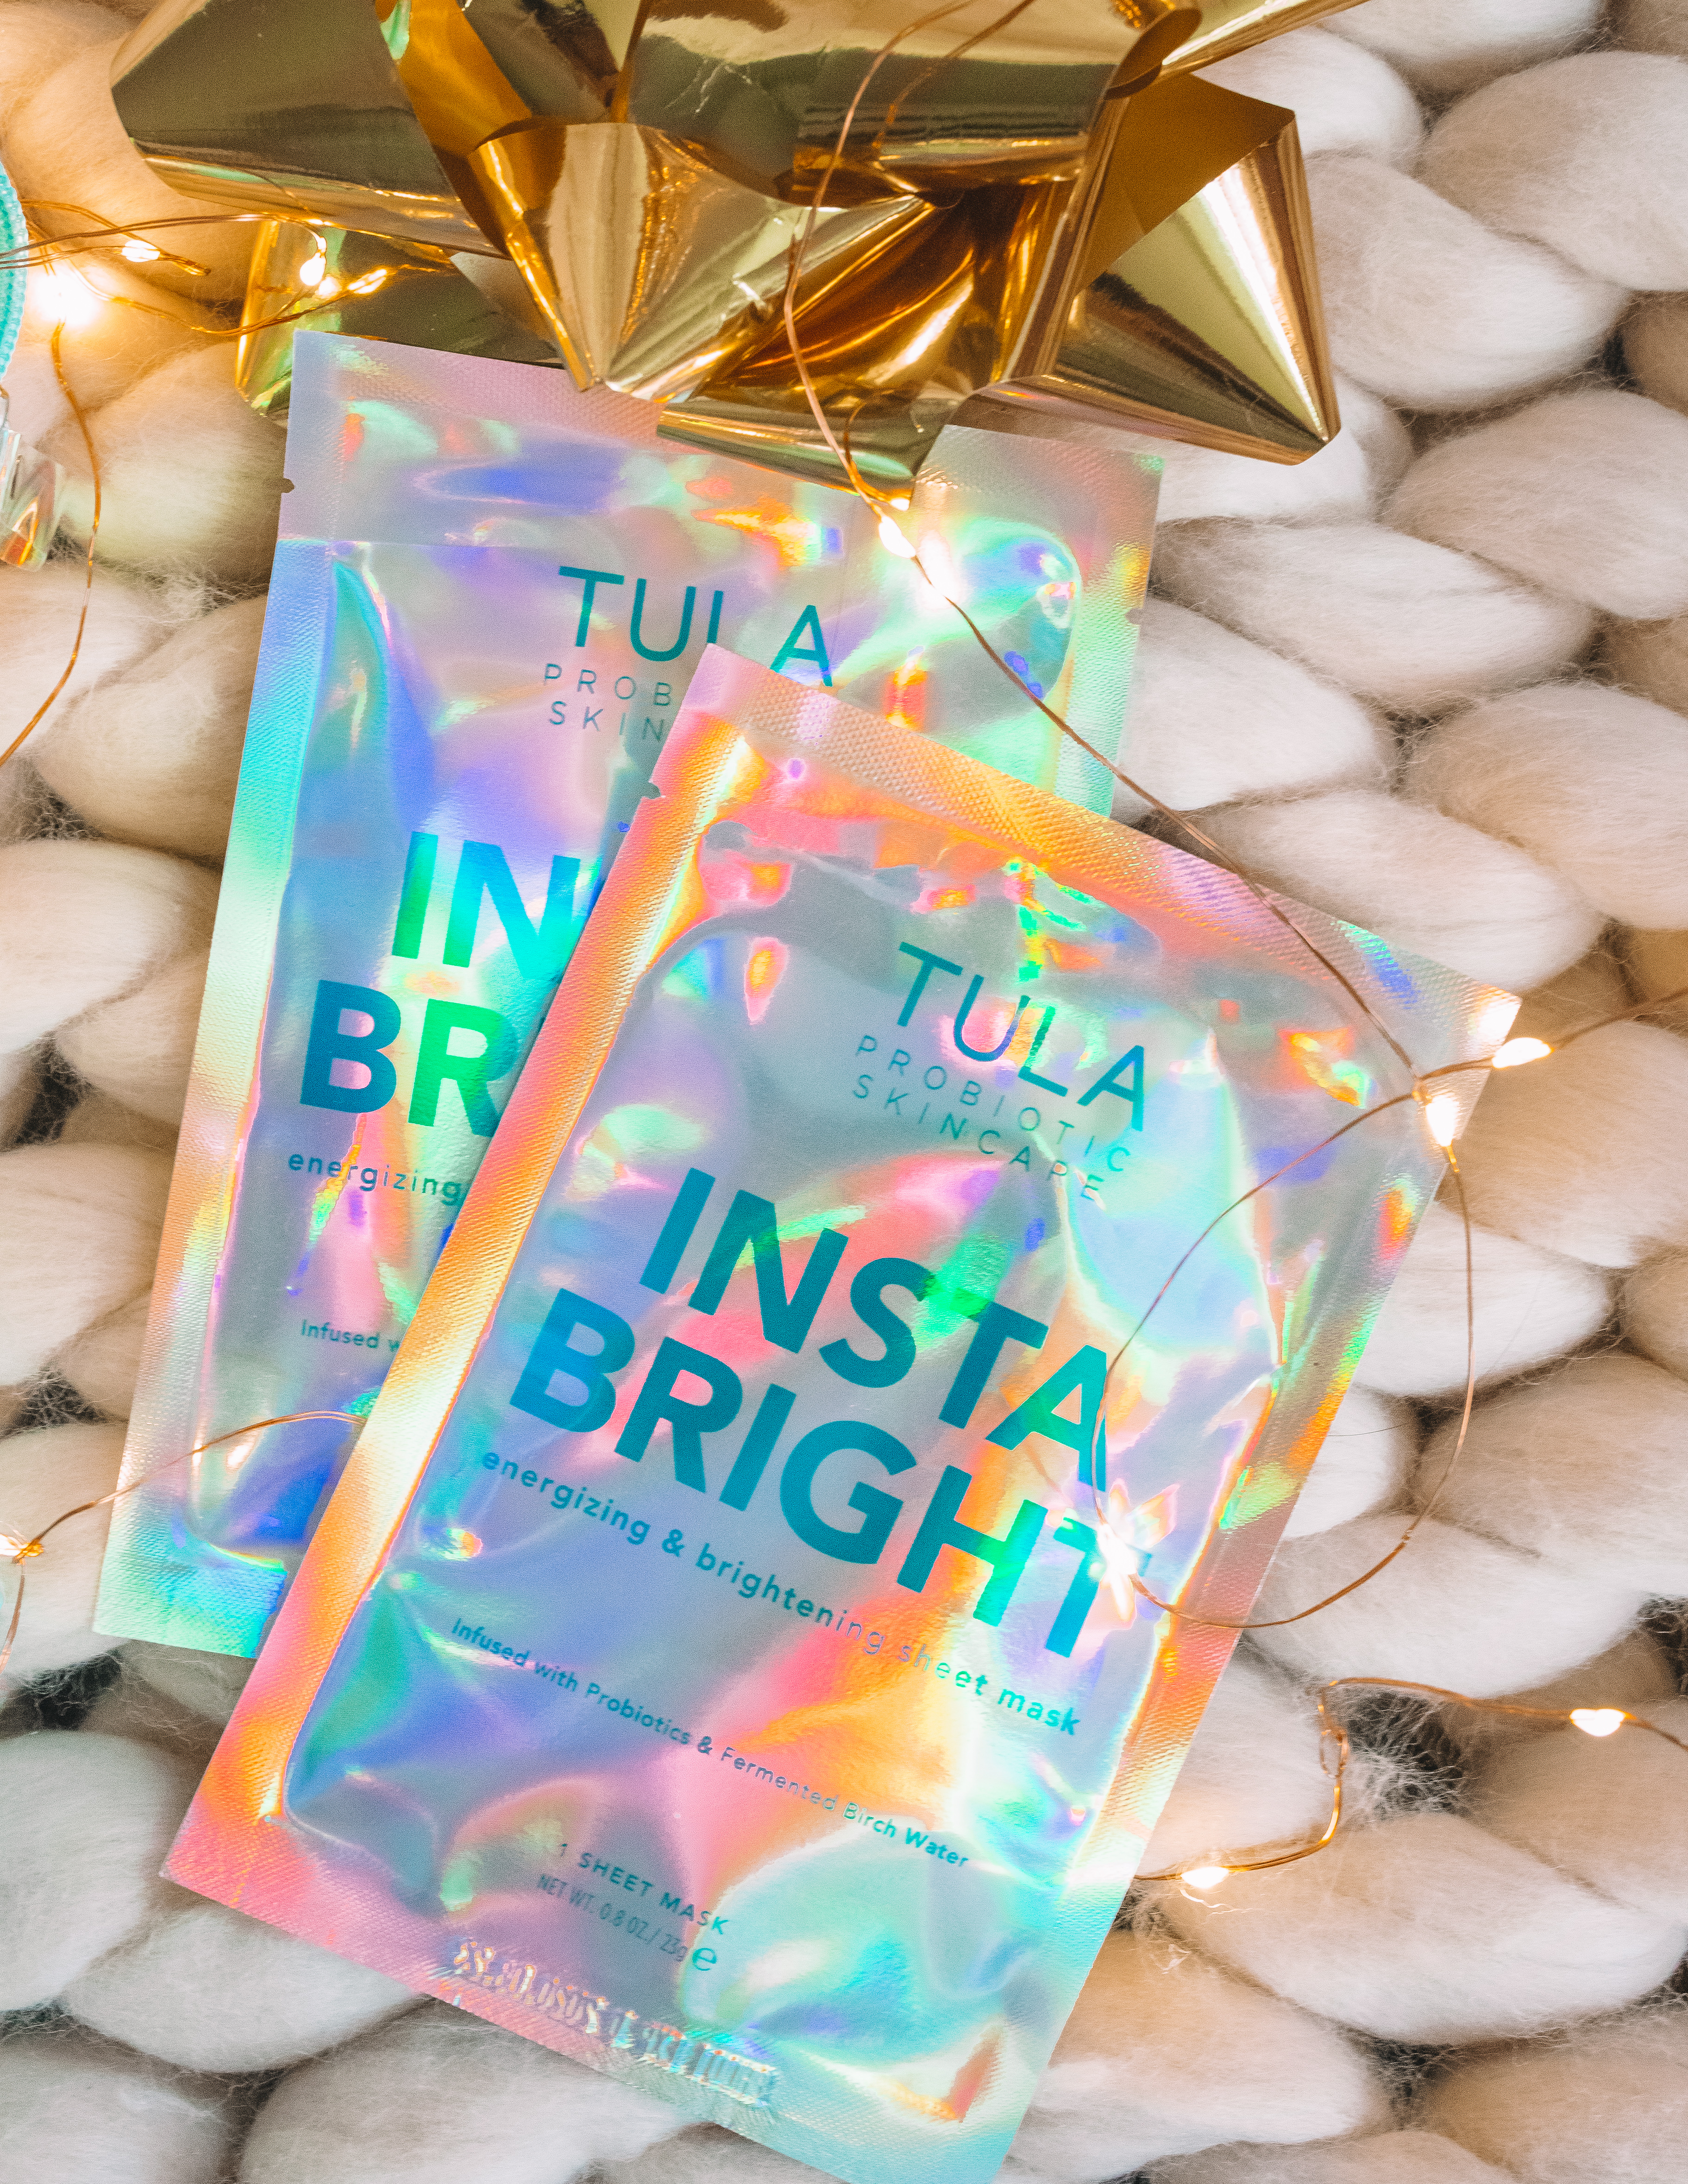 Tula Skincare Review Holiday Kit - Instant Bright Mask